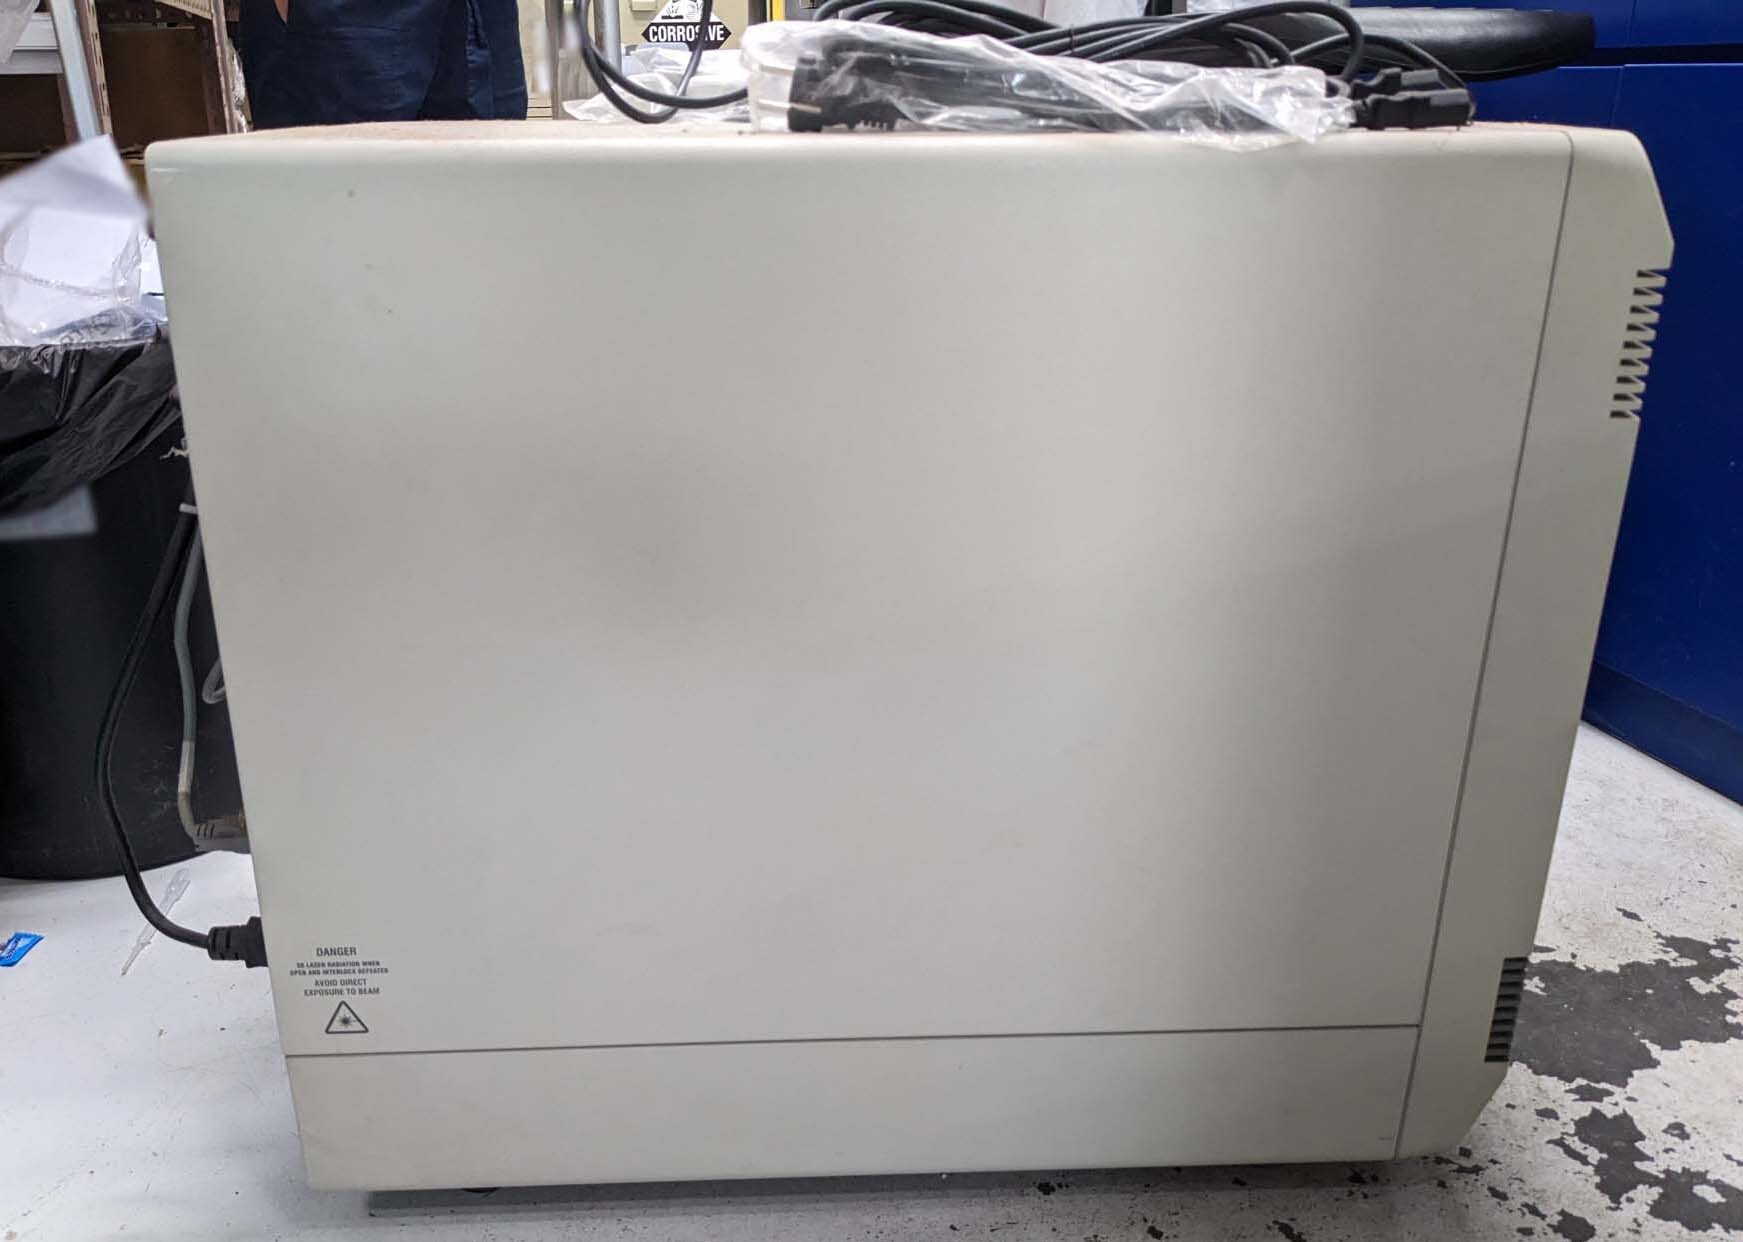 Photo Used APPLIED BIOSYSTEMS / ABI / MDS SCIEX 7900 HT For Sale